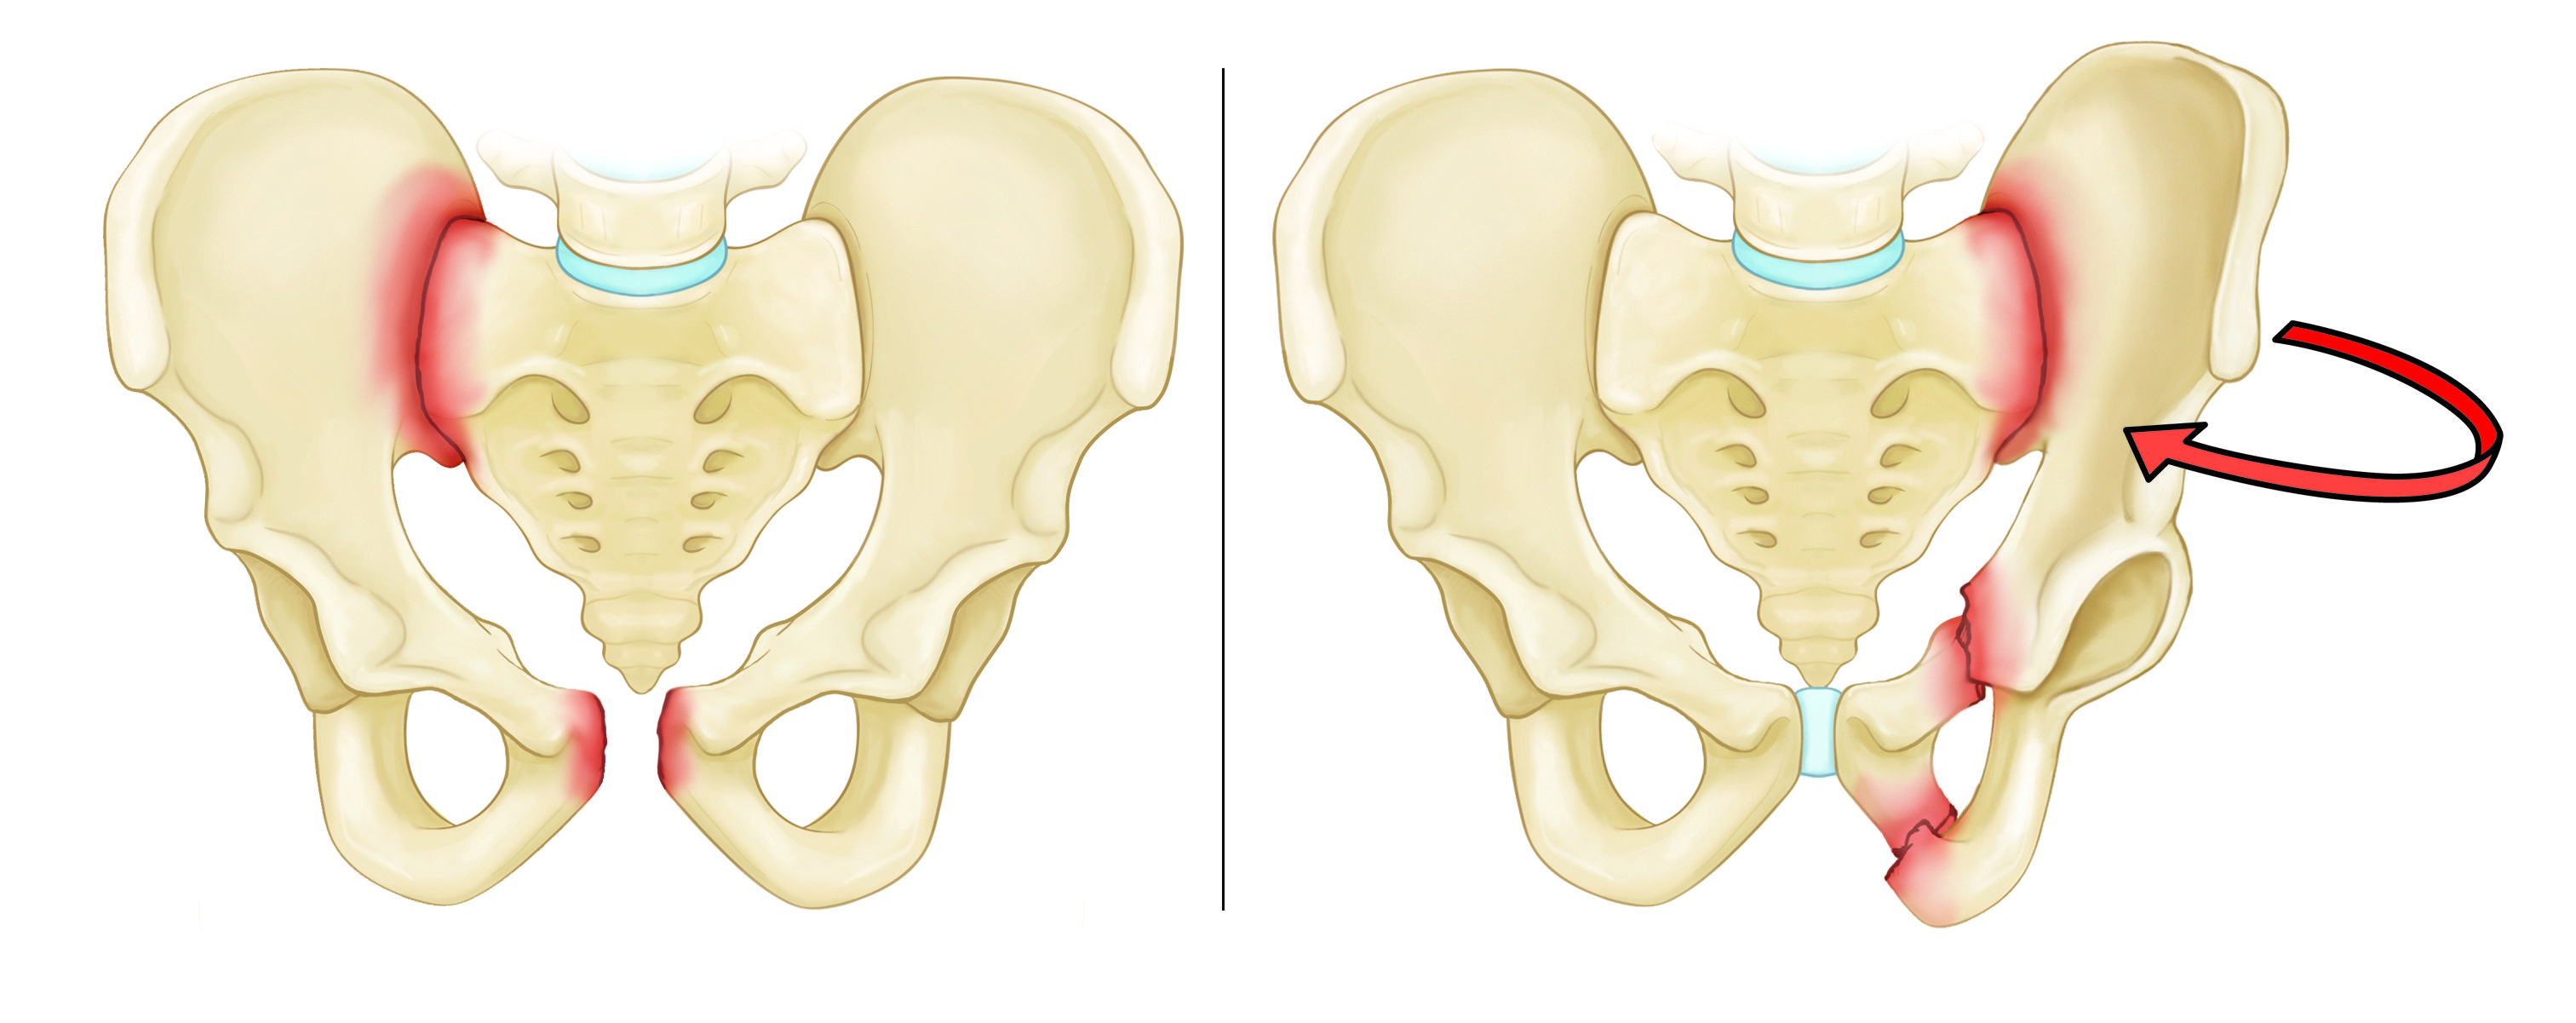 Types of Pelvis Fractures | Carrothers Orthopaedics